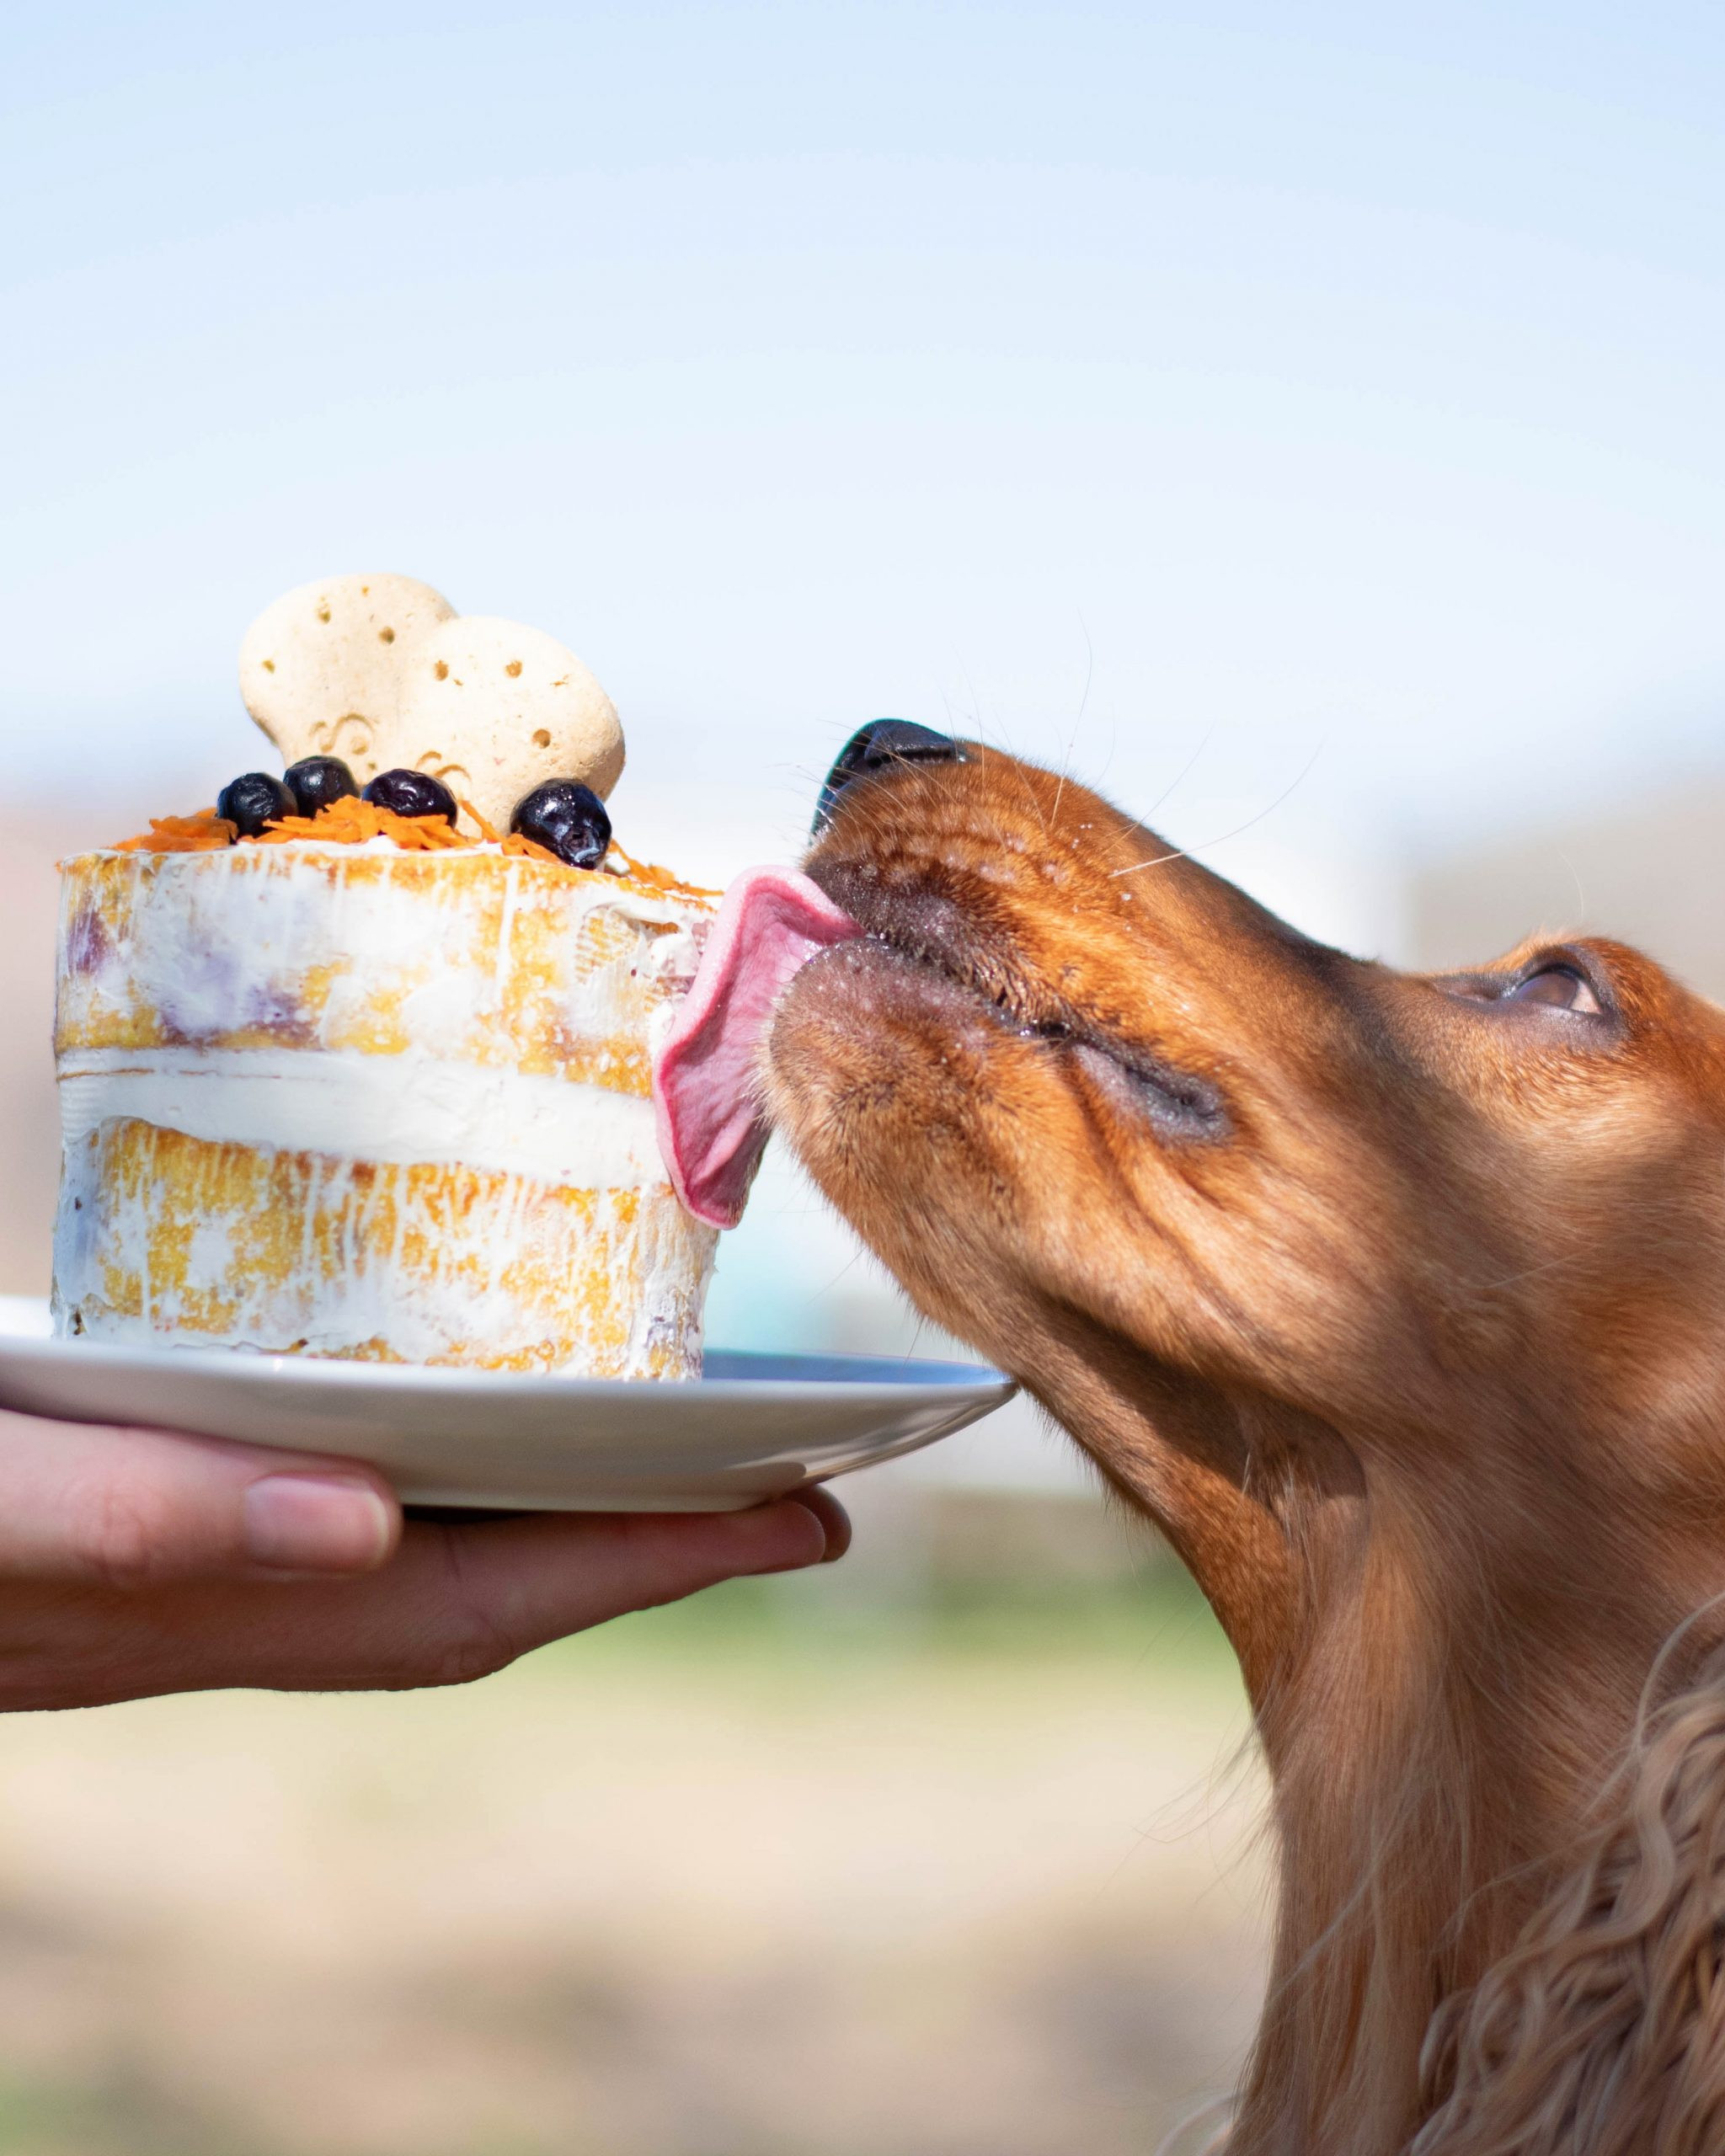 Dog Birthday Cake Recipe Without Peanut Butter
 9 Dog Birthday Cake Recipes Without Peanut Butter Hey